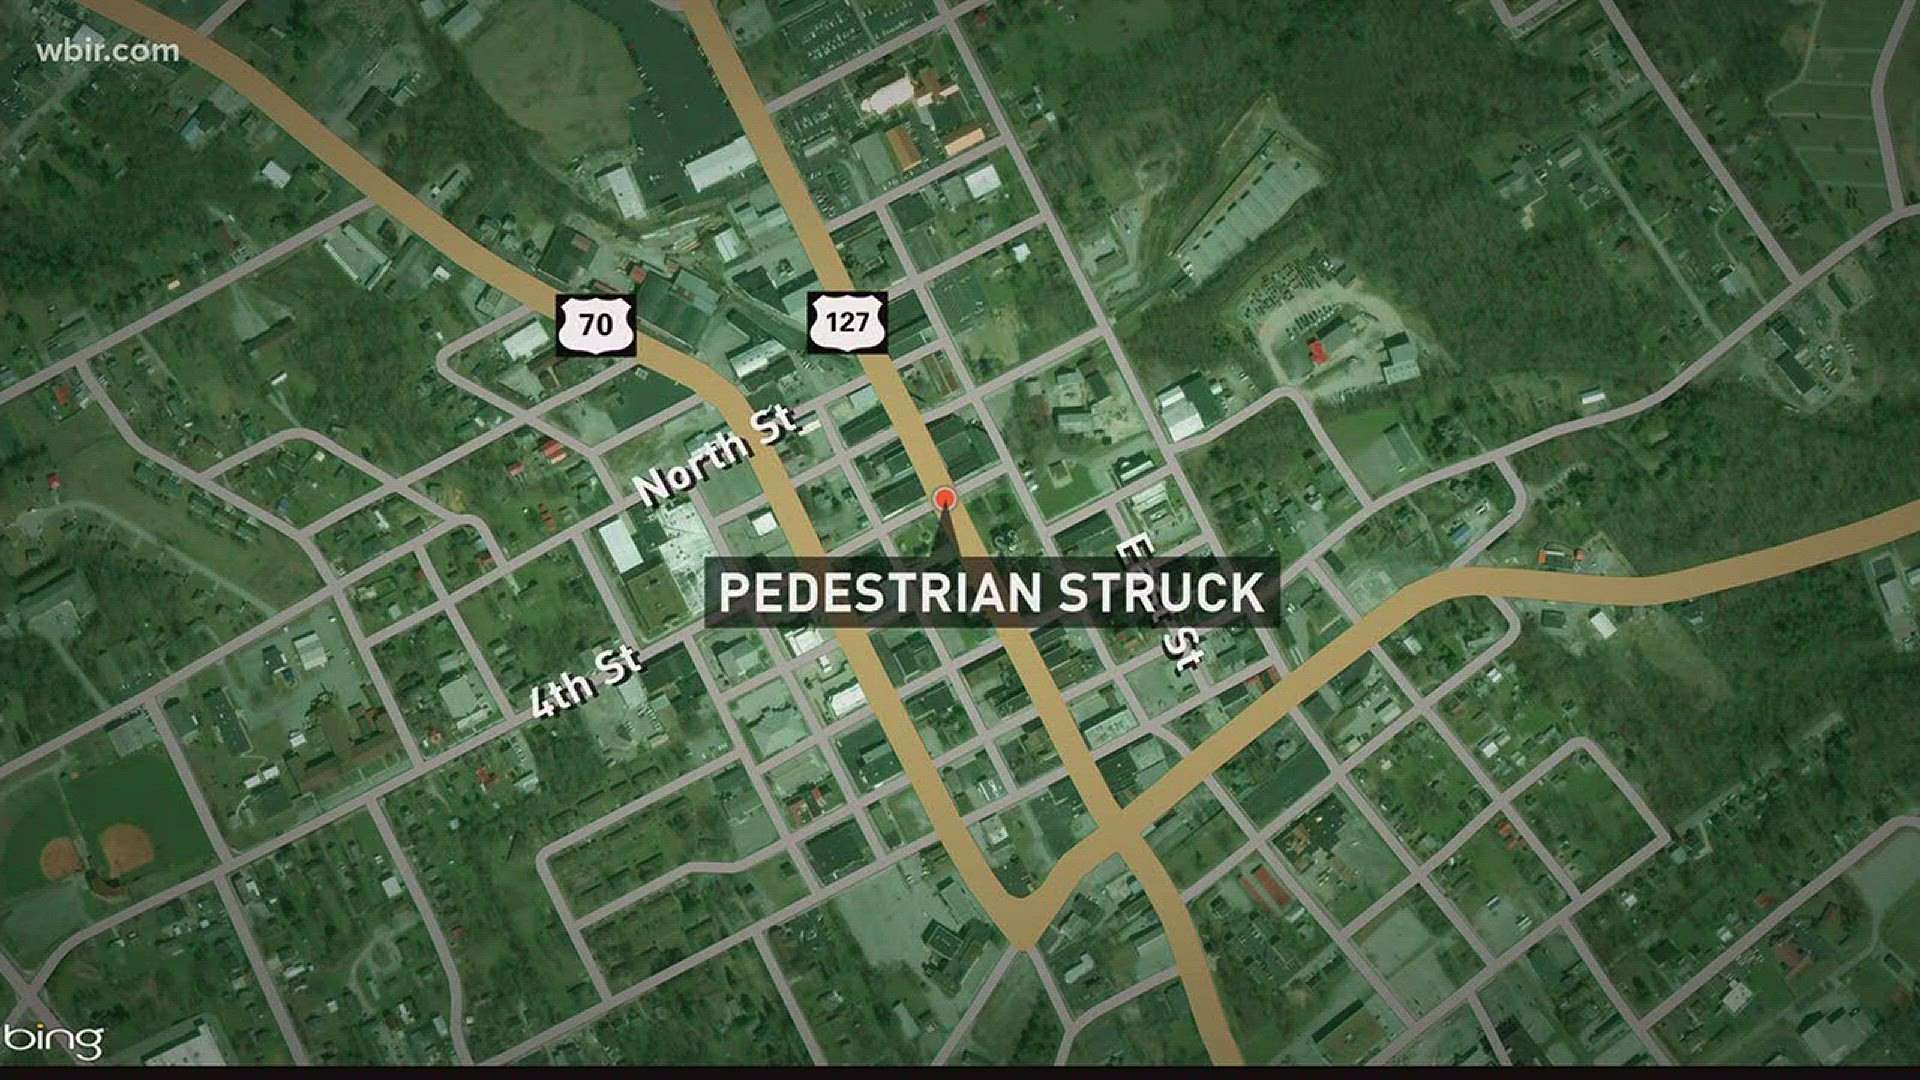 Nov. 20, 2017: A Crossville man is dead after being stuck by a tractor trailer while he was crossing the street.